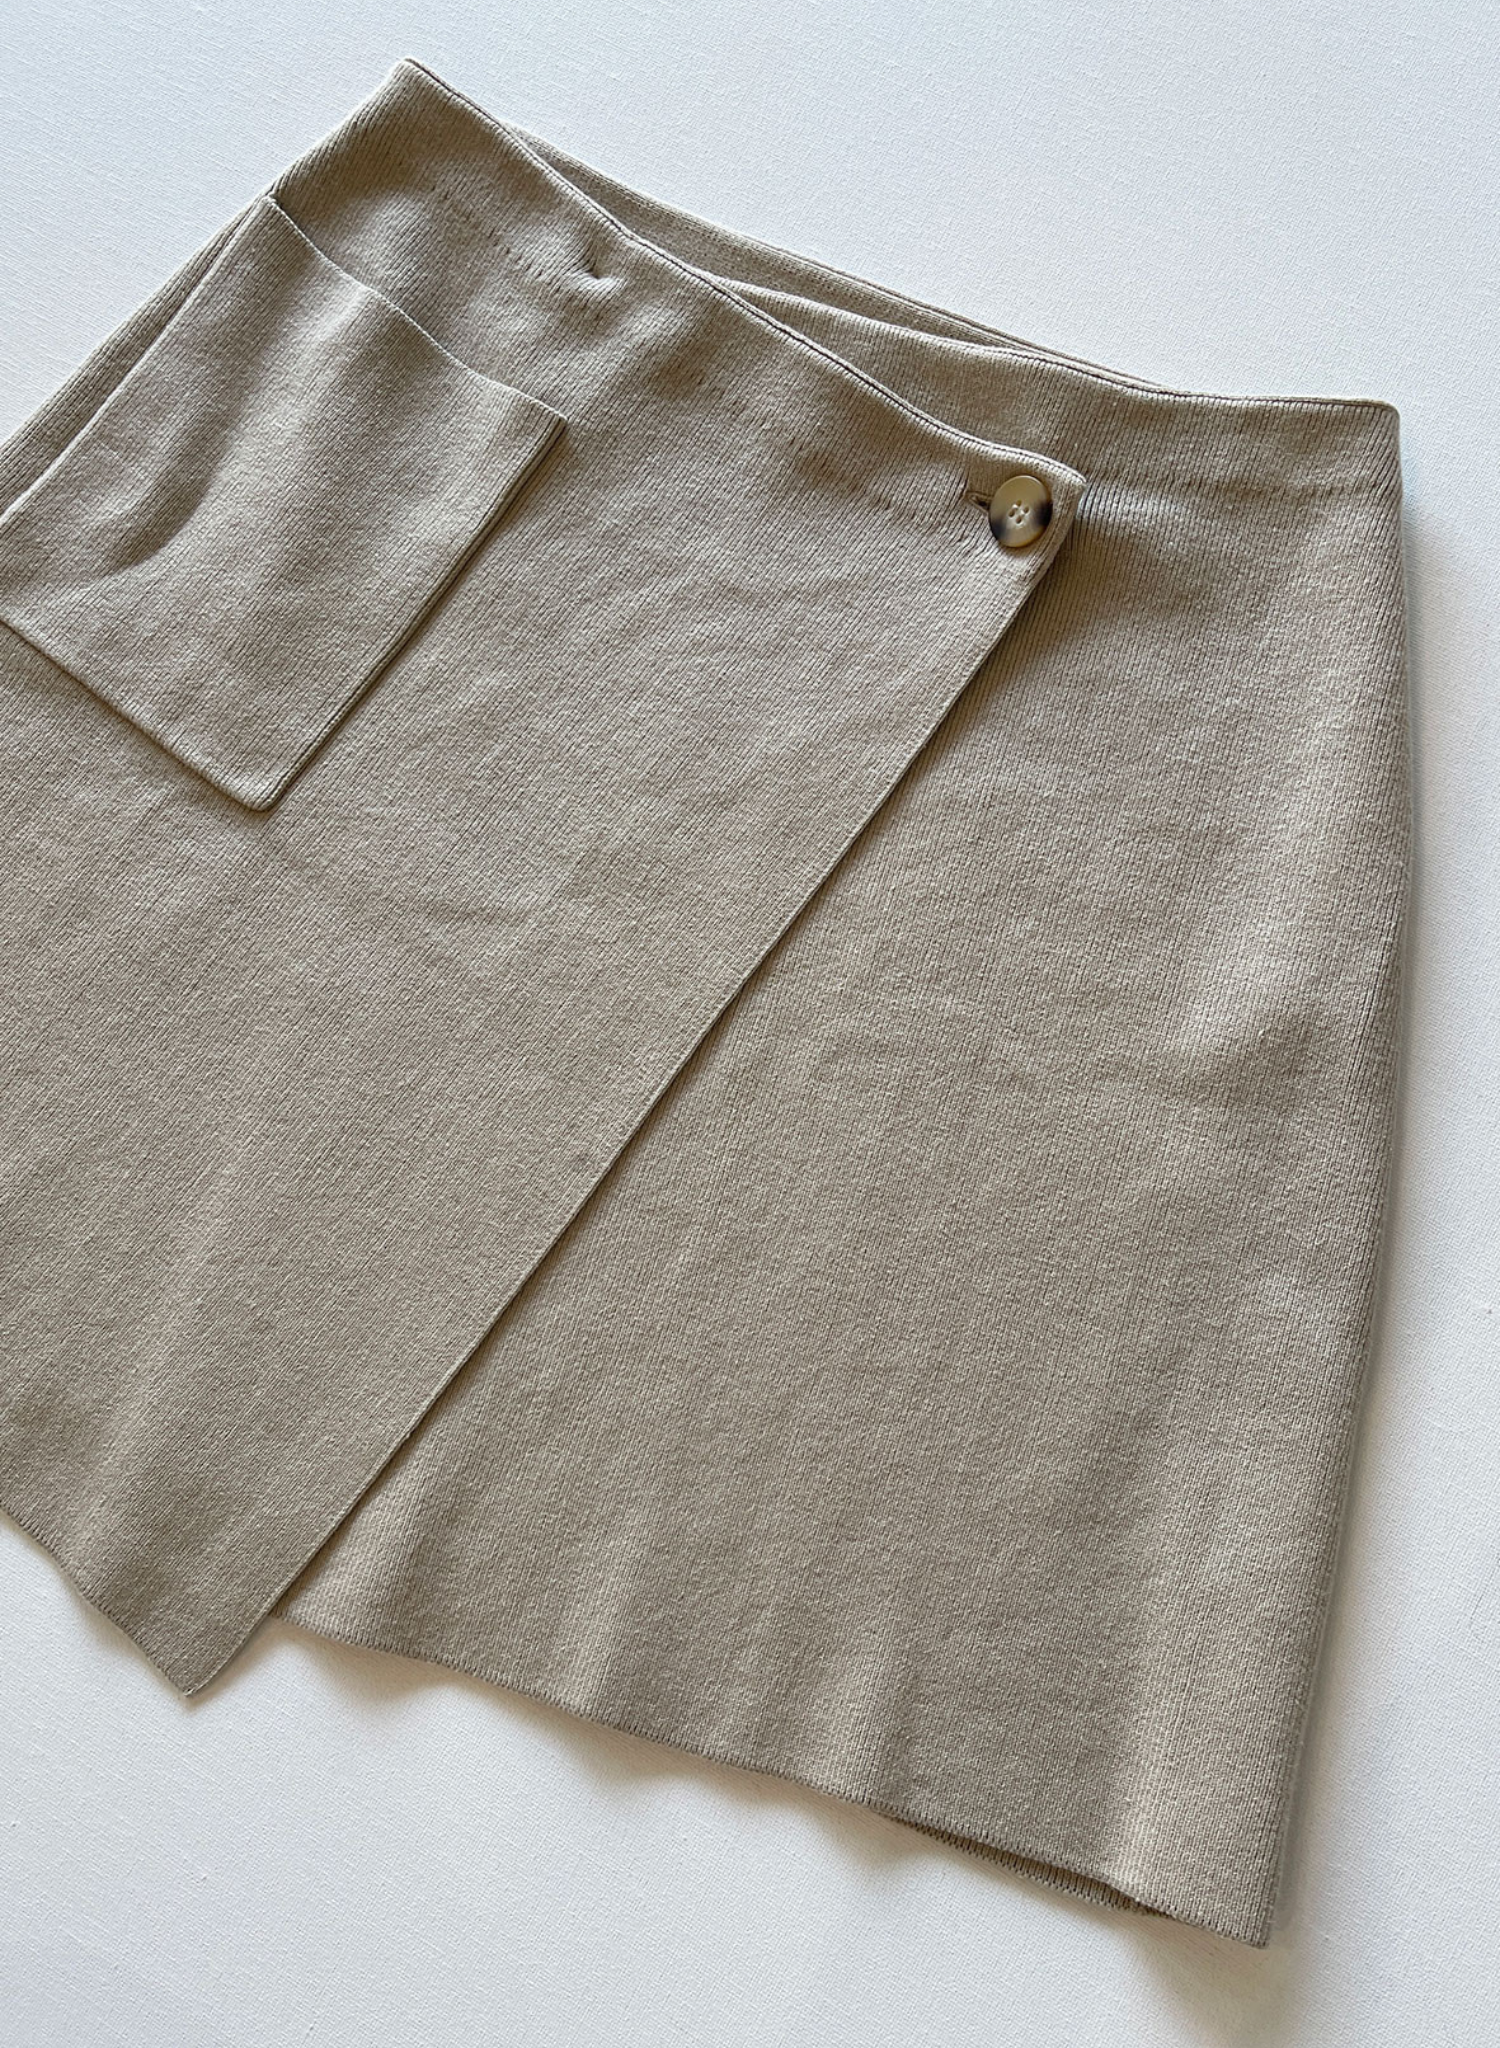 Ria Skirt in Taupe